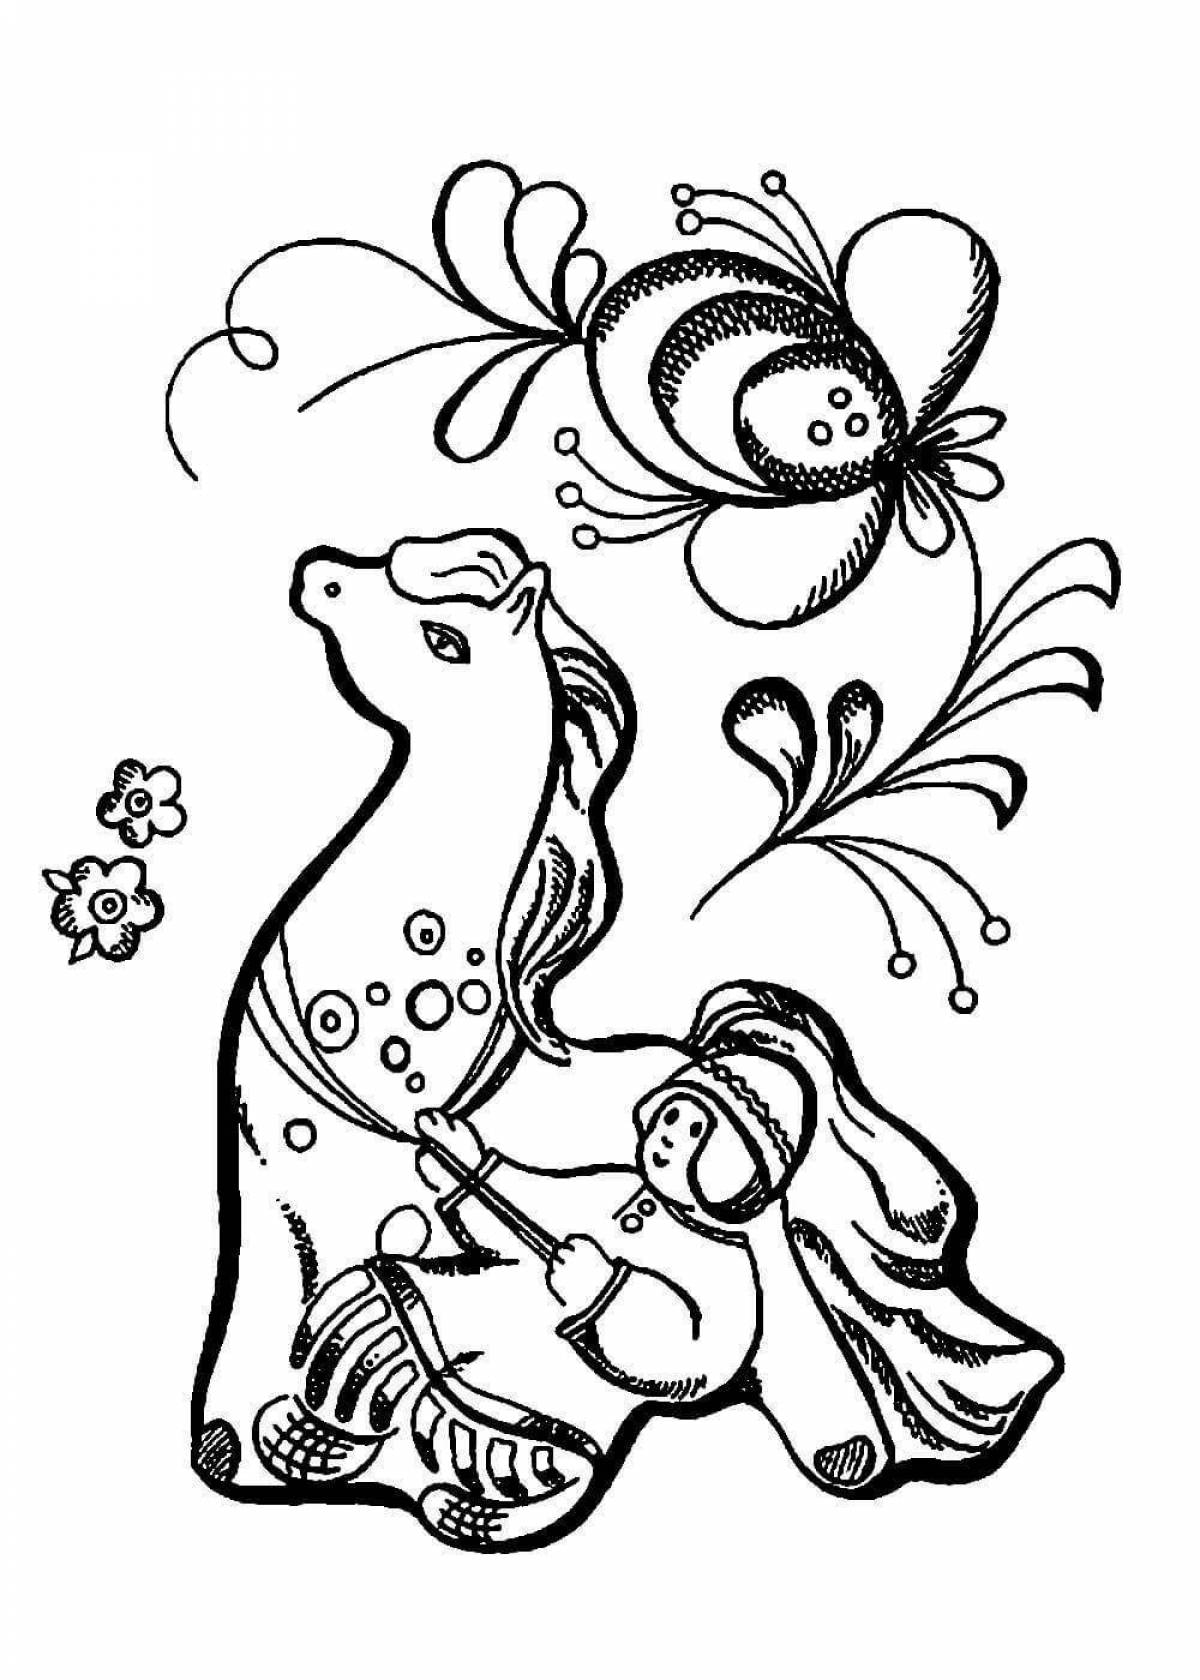 Fun craft coloring pages for preschoolers